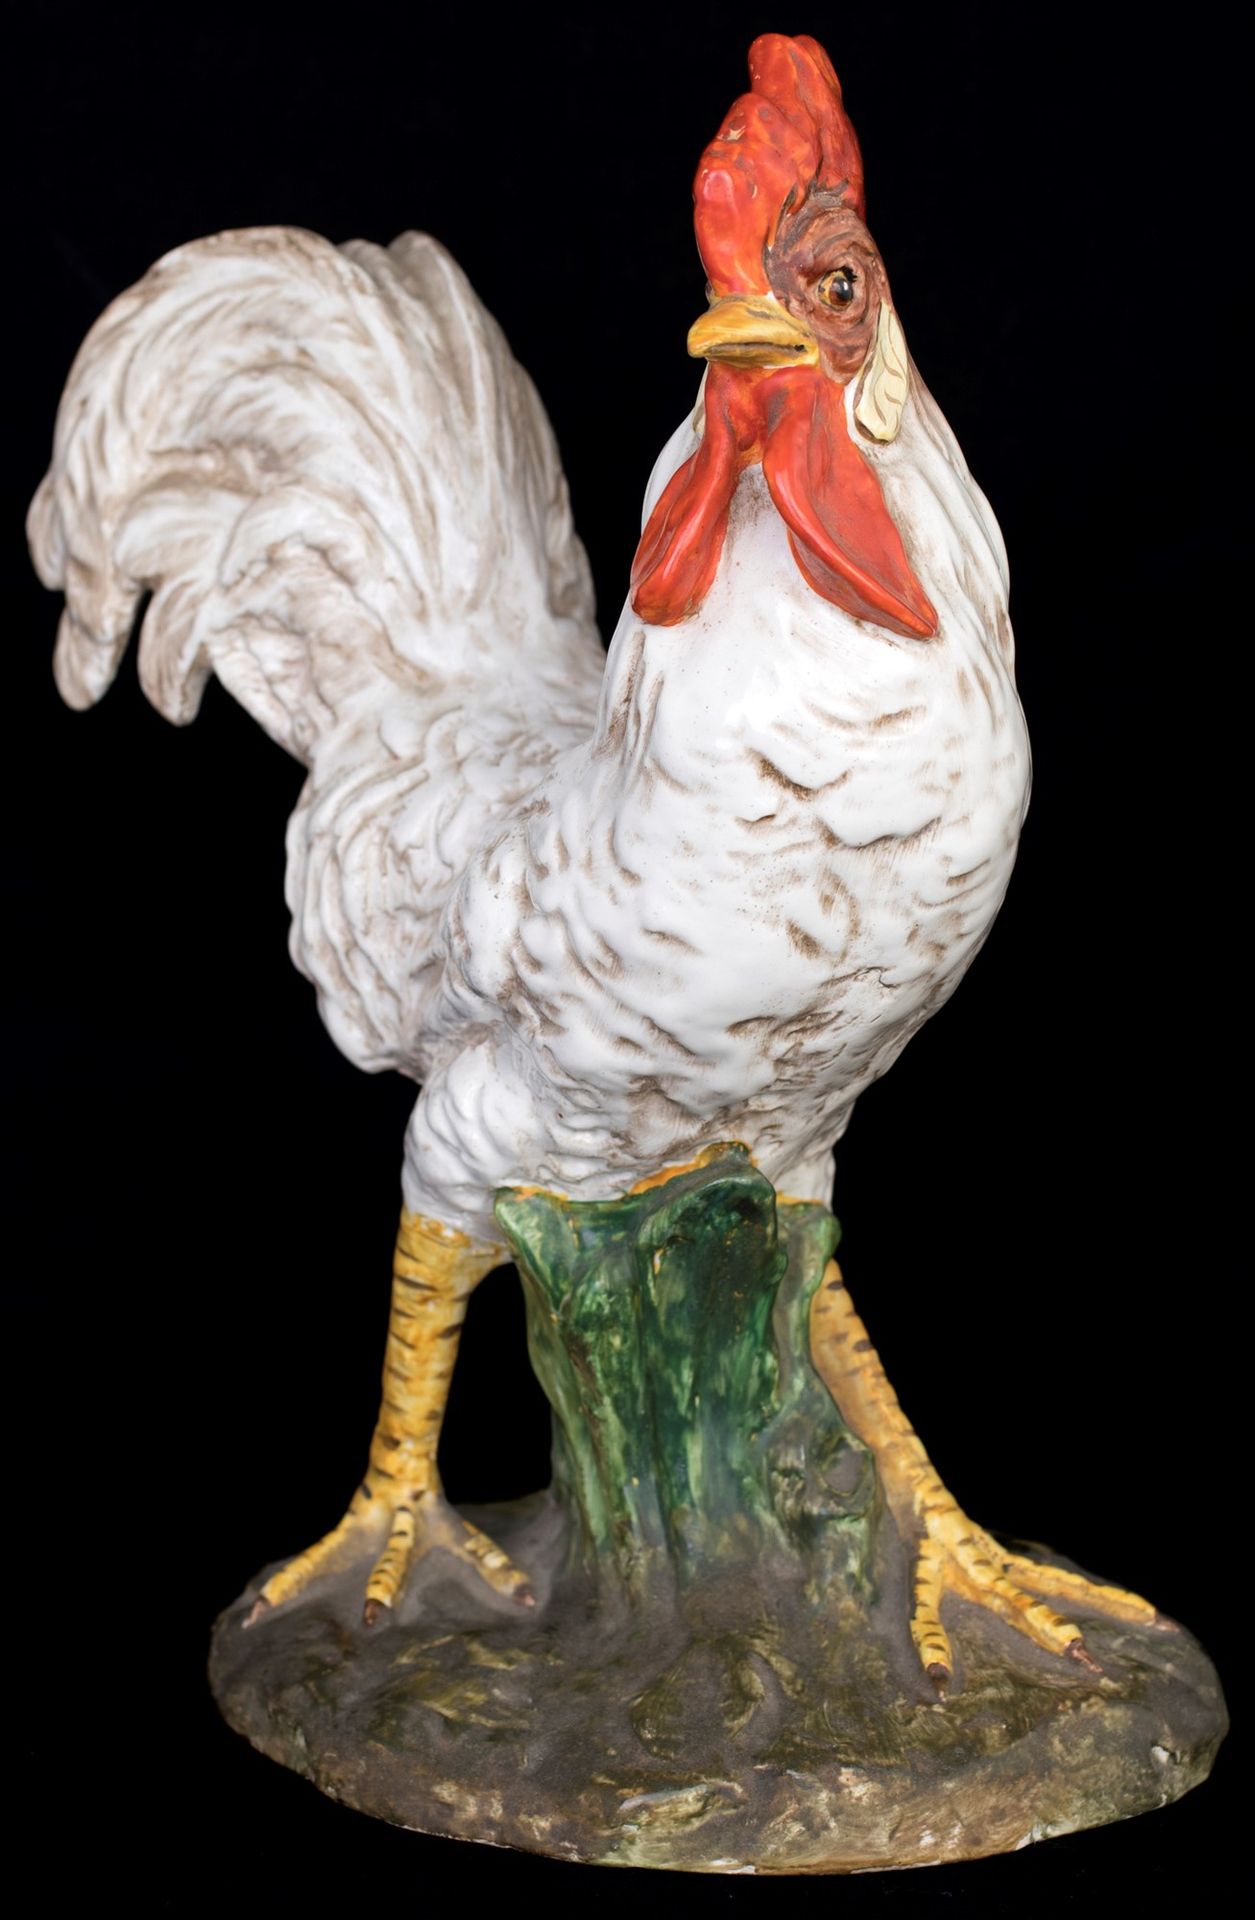 Polychrome majolica rooster, first half of the 20th century 草皮上的运动肖像；一条腿上有小裂缝